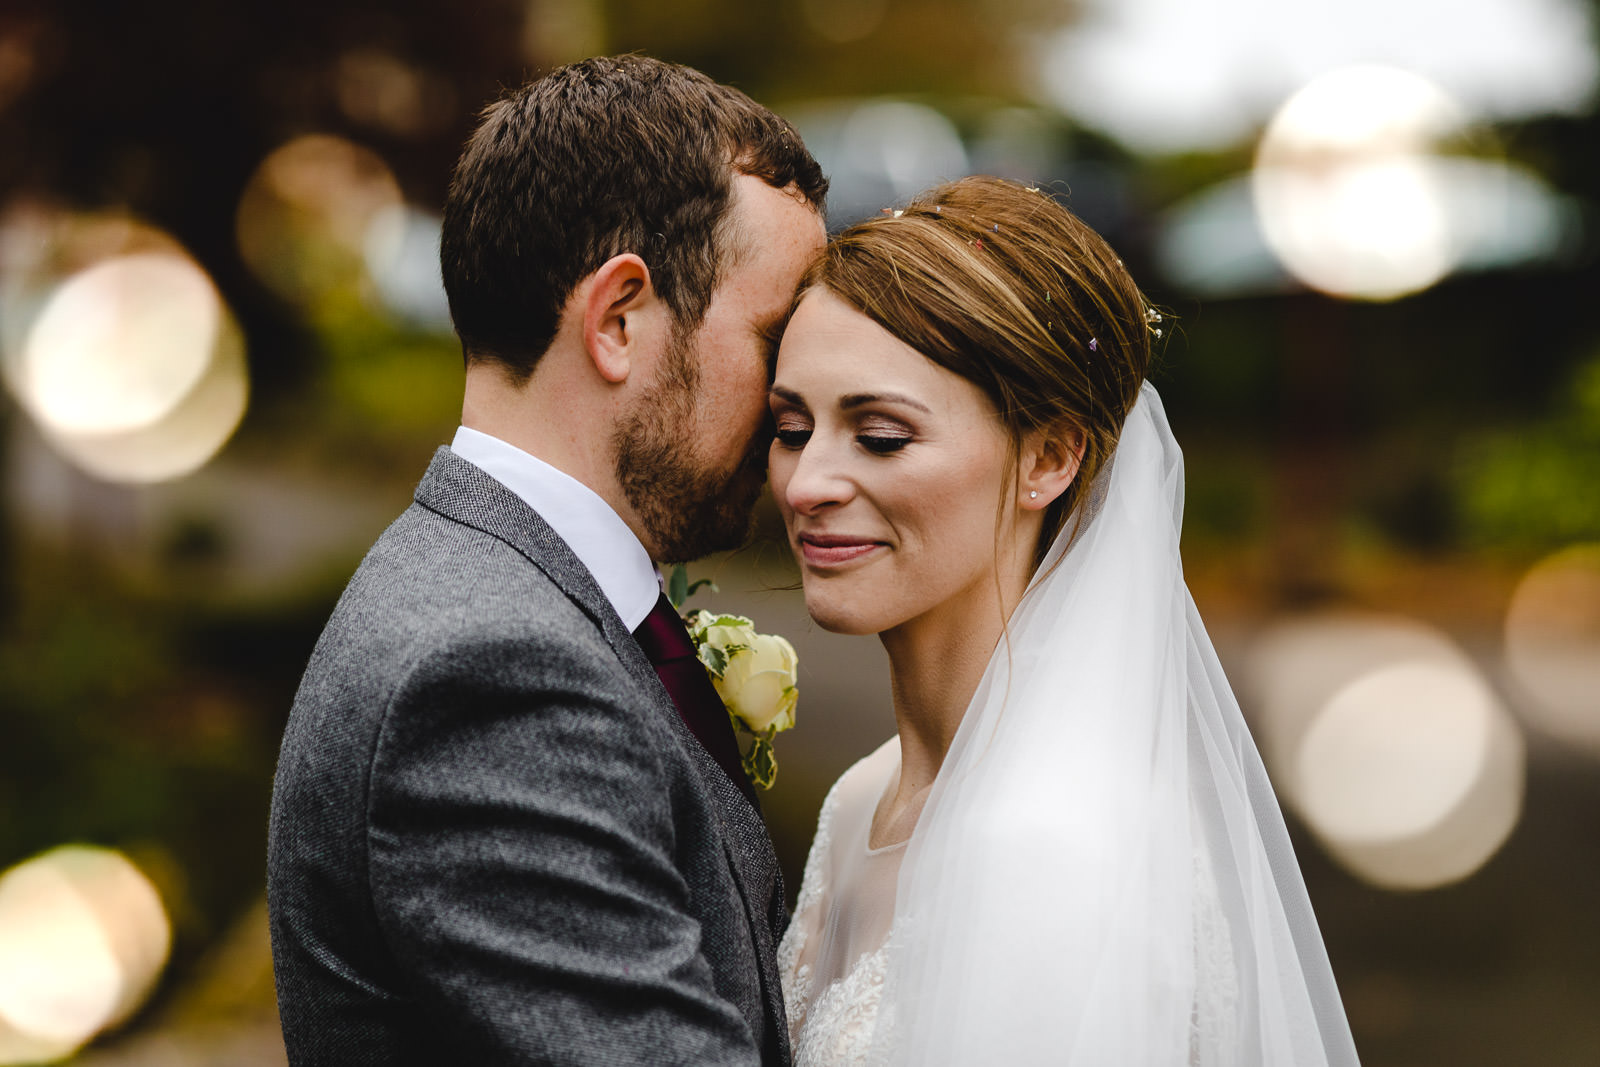 Miskin Manor Wedding Photography - Art by Design Photography - Bride and Groom